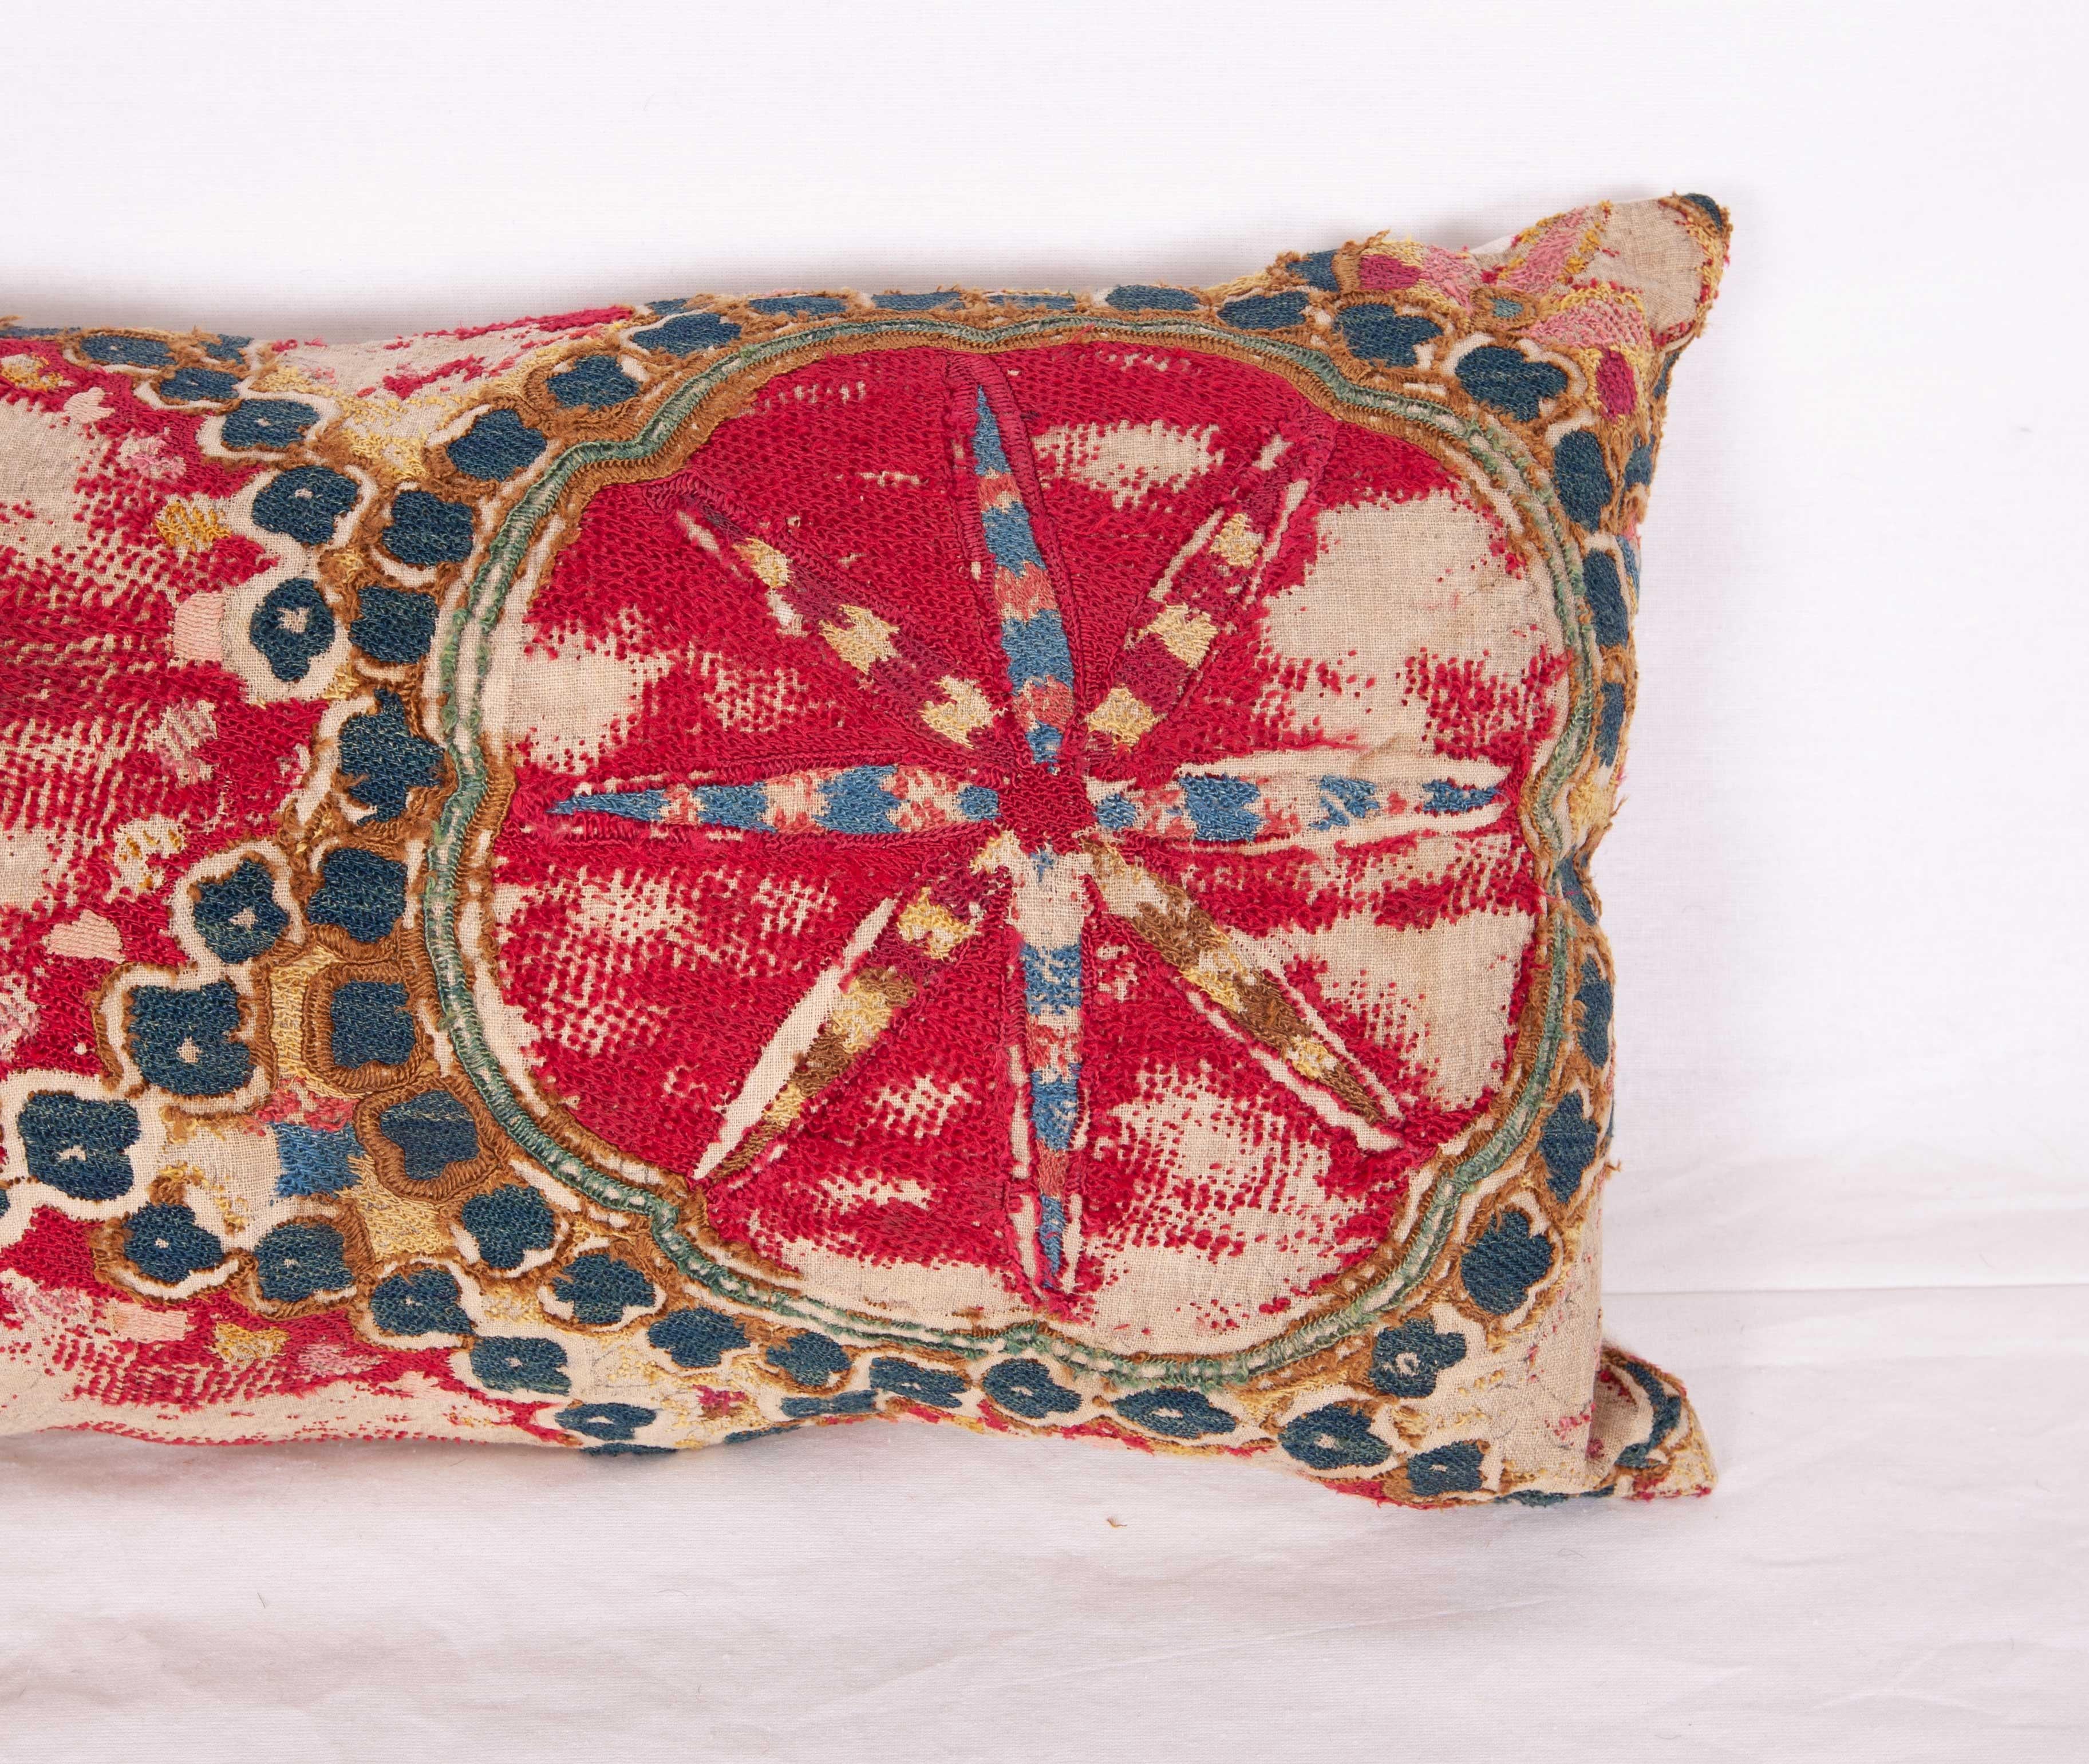 The pillow case is made from an antique Uzbek Suzani from Tashkent. It is silk embroidery on a handwoven cotton field. The backing is pure linen, and it does not come with an insert but bag made to the size in cotton to accommodate insert materials.